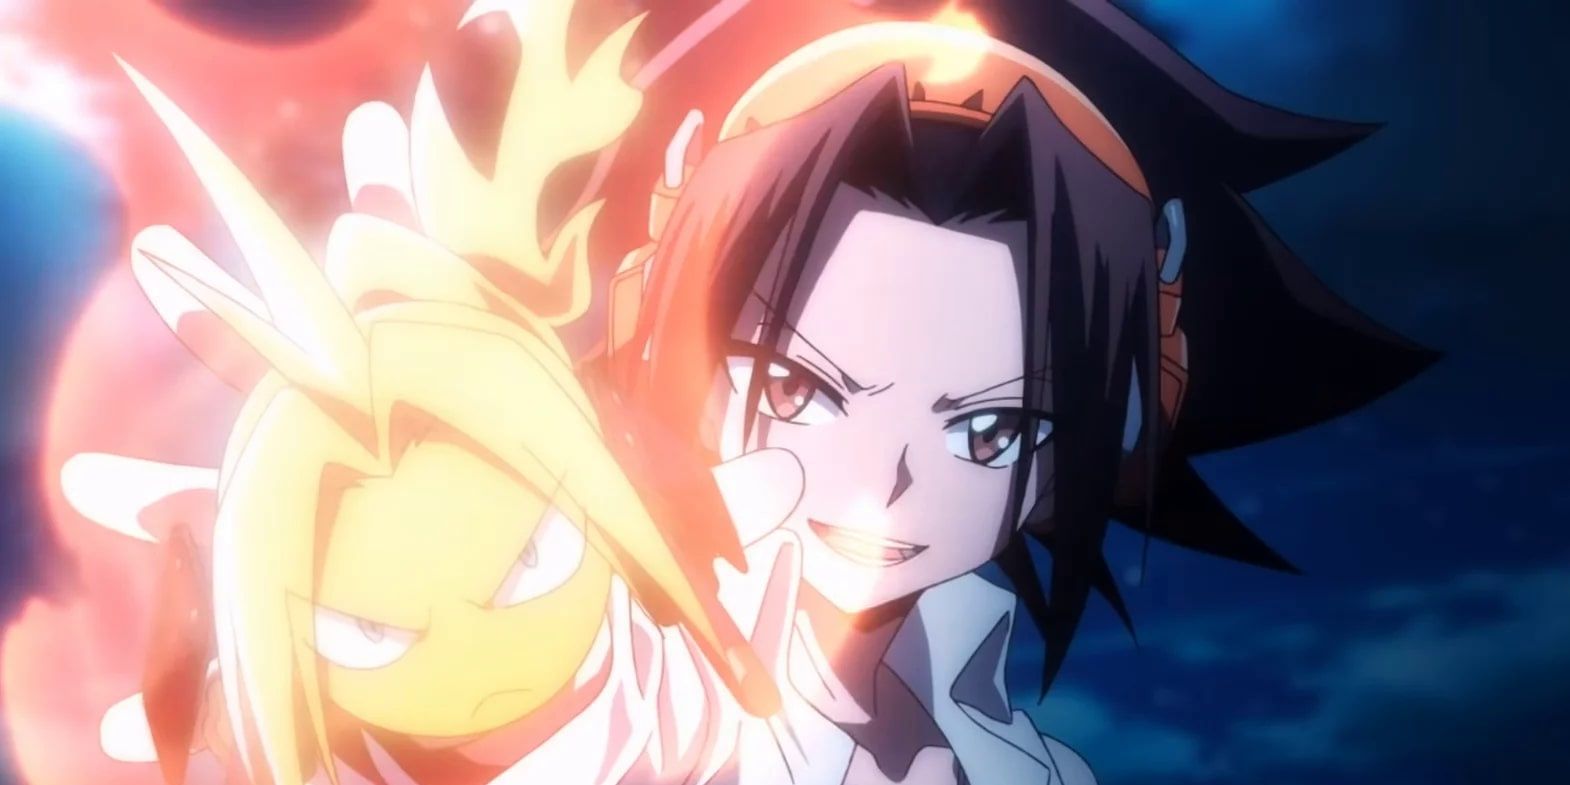 Shaman King: Where to Watch & Read the Series